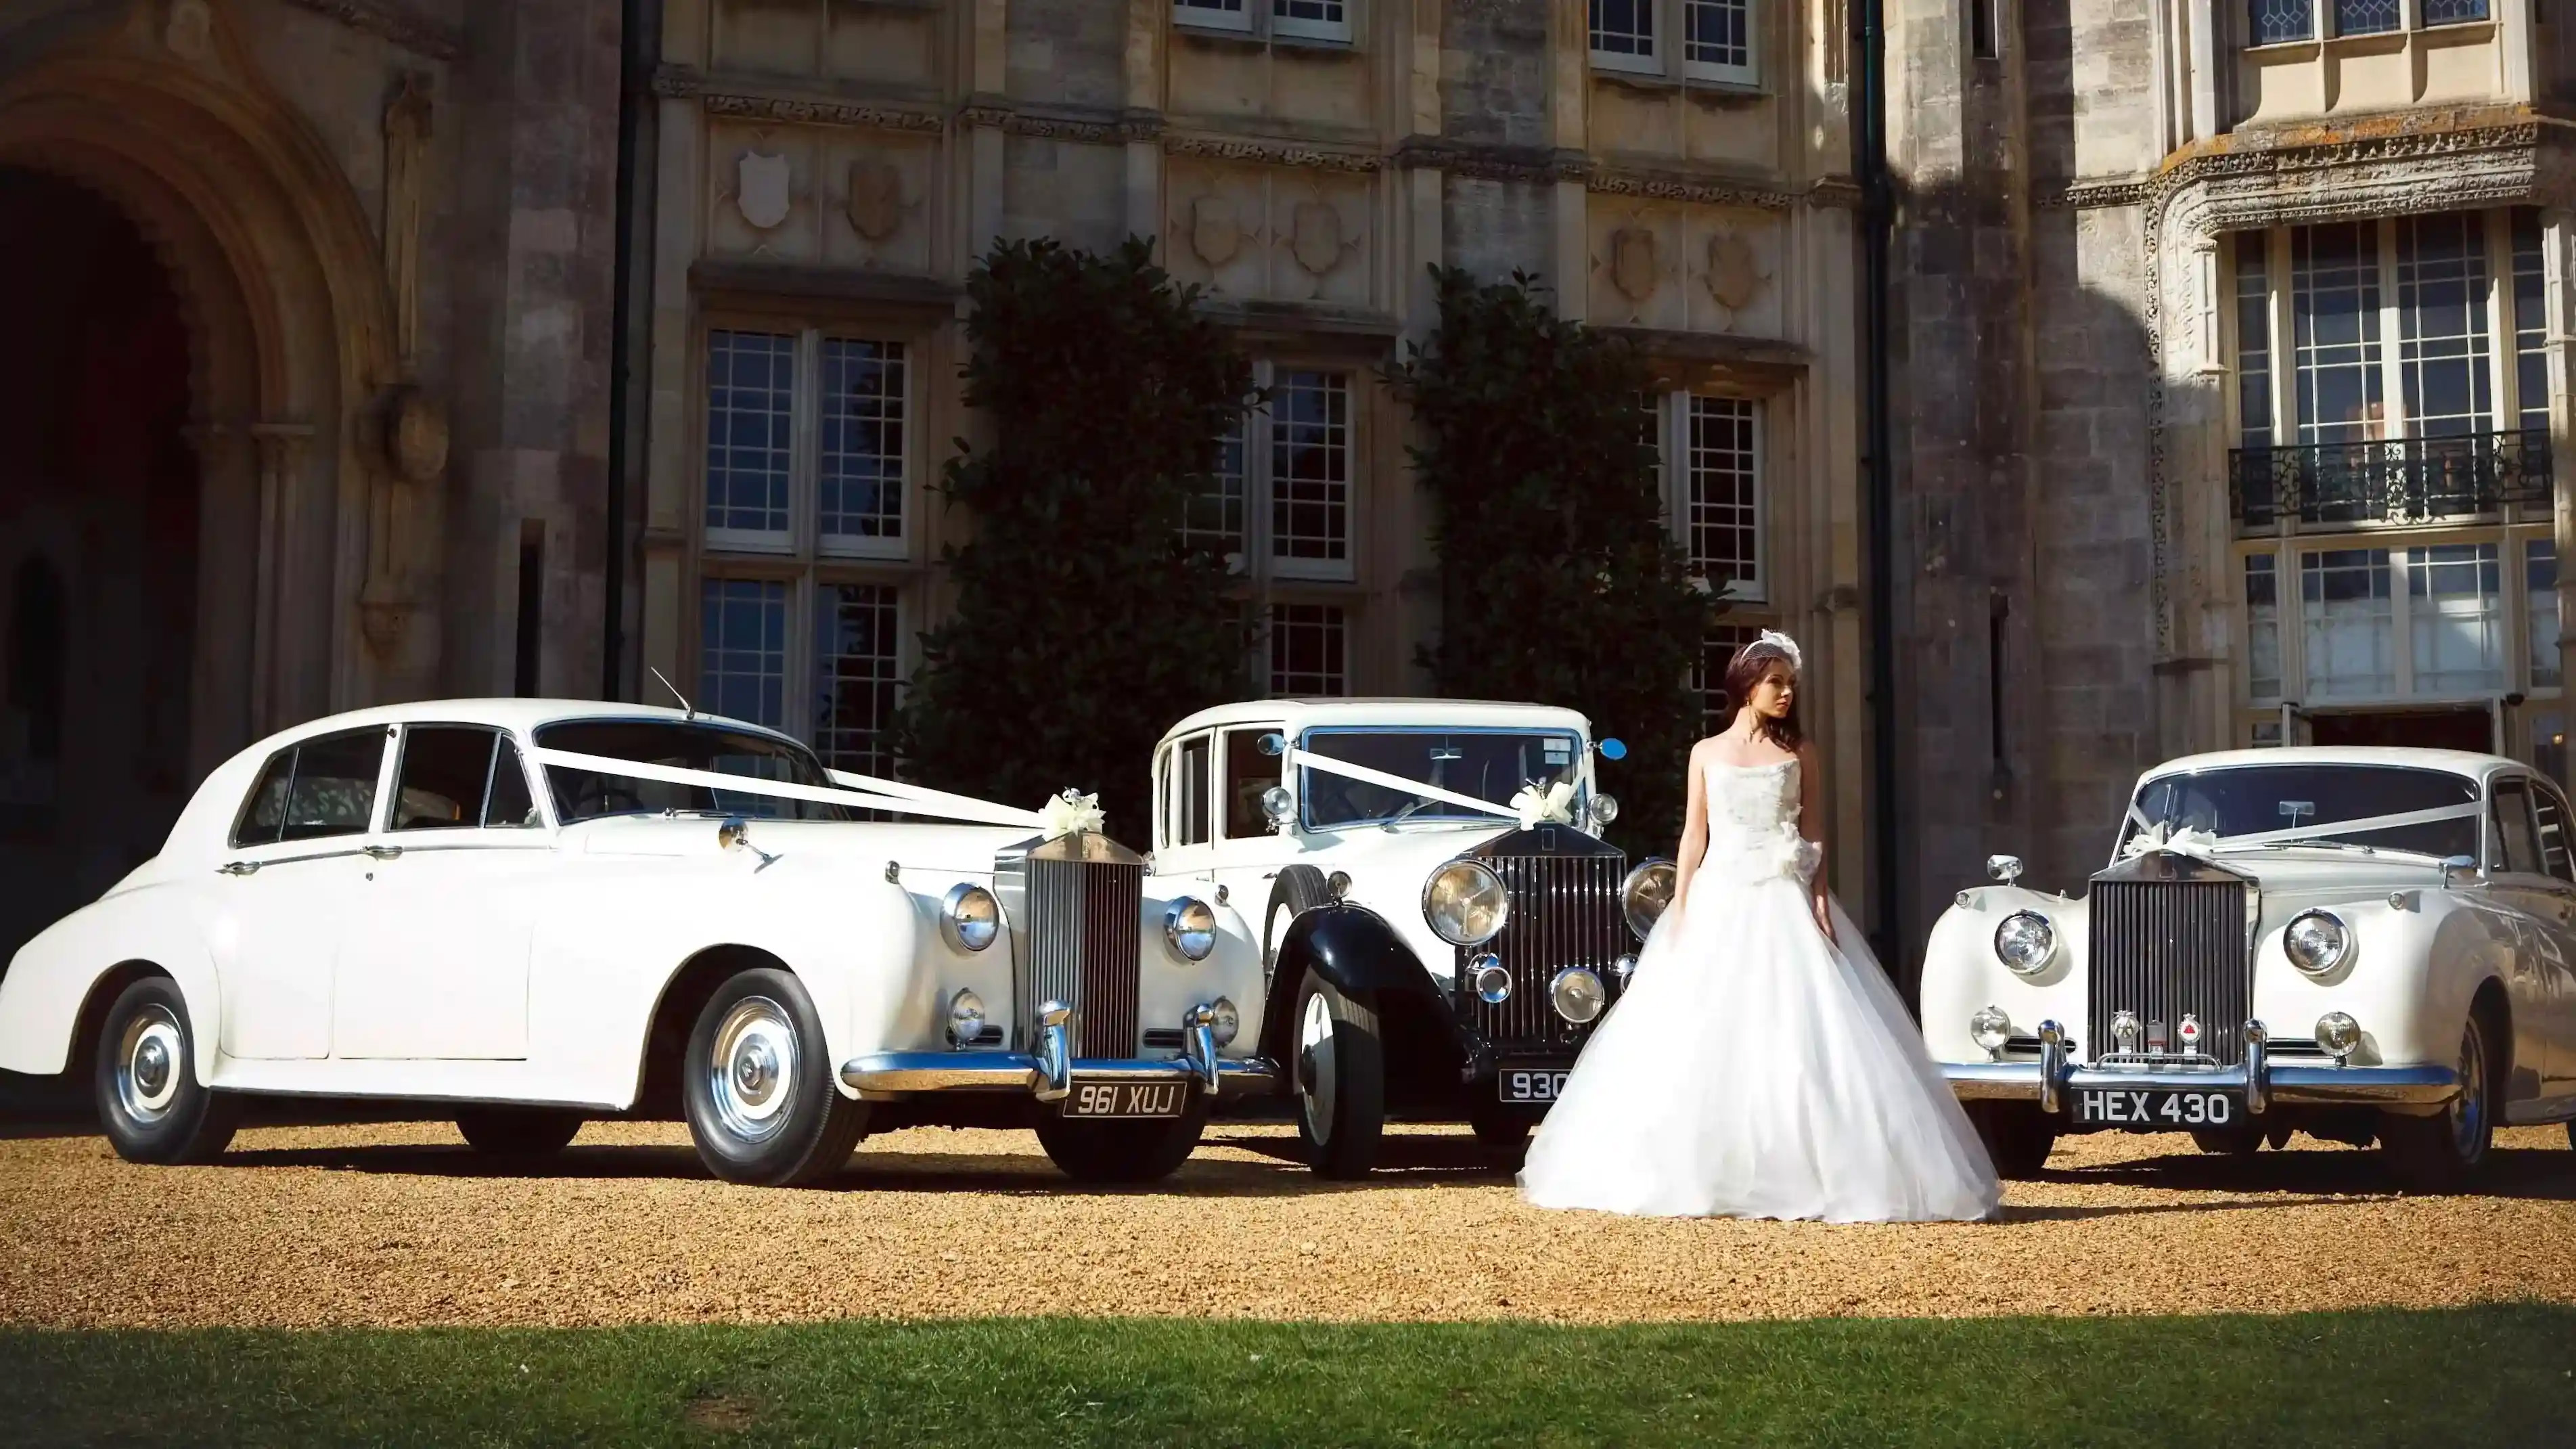 Selection of three classic and Vintage Rolls-Royce in White with Bride wearing a white wedding dress standing in the middle of the vehicles. Background is a popular Cornwall wedding venue in the style of a castle.